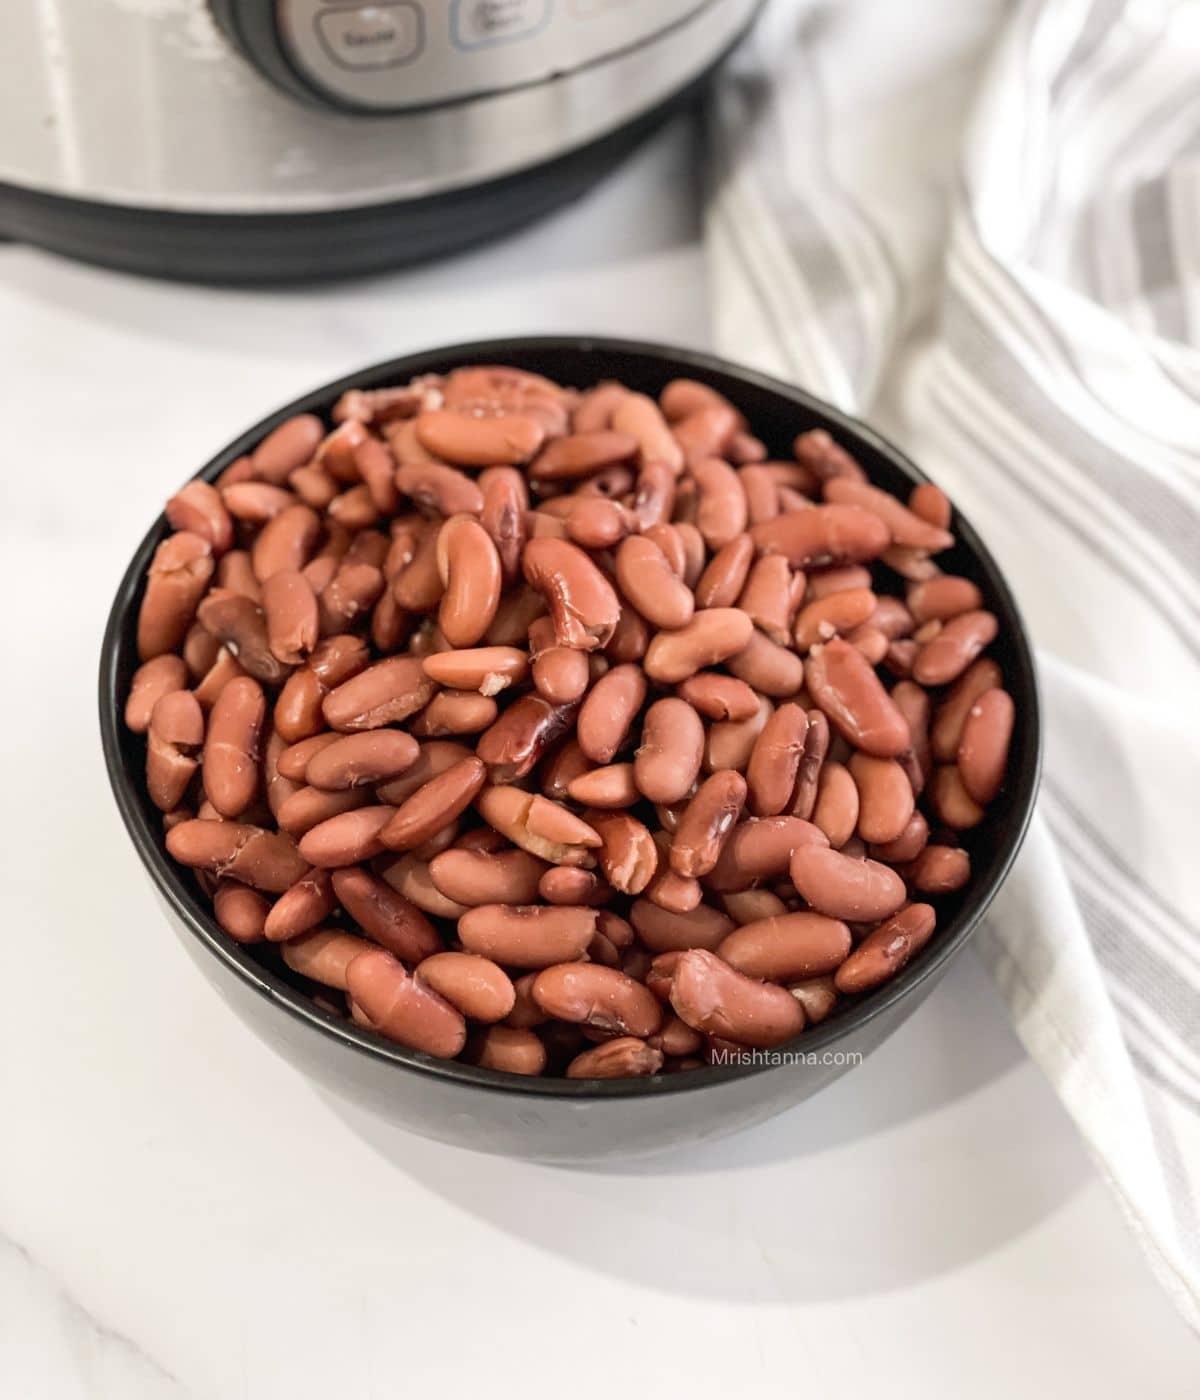 A bowl of cooked kidney beans are on the table near the Instant pot.